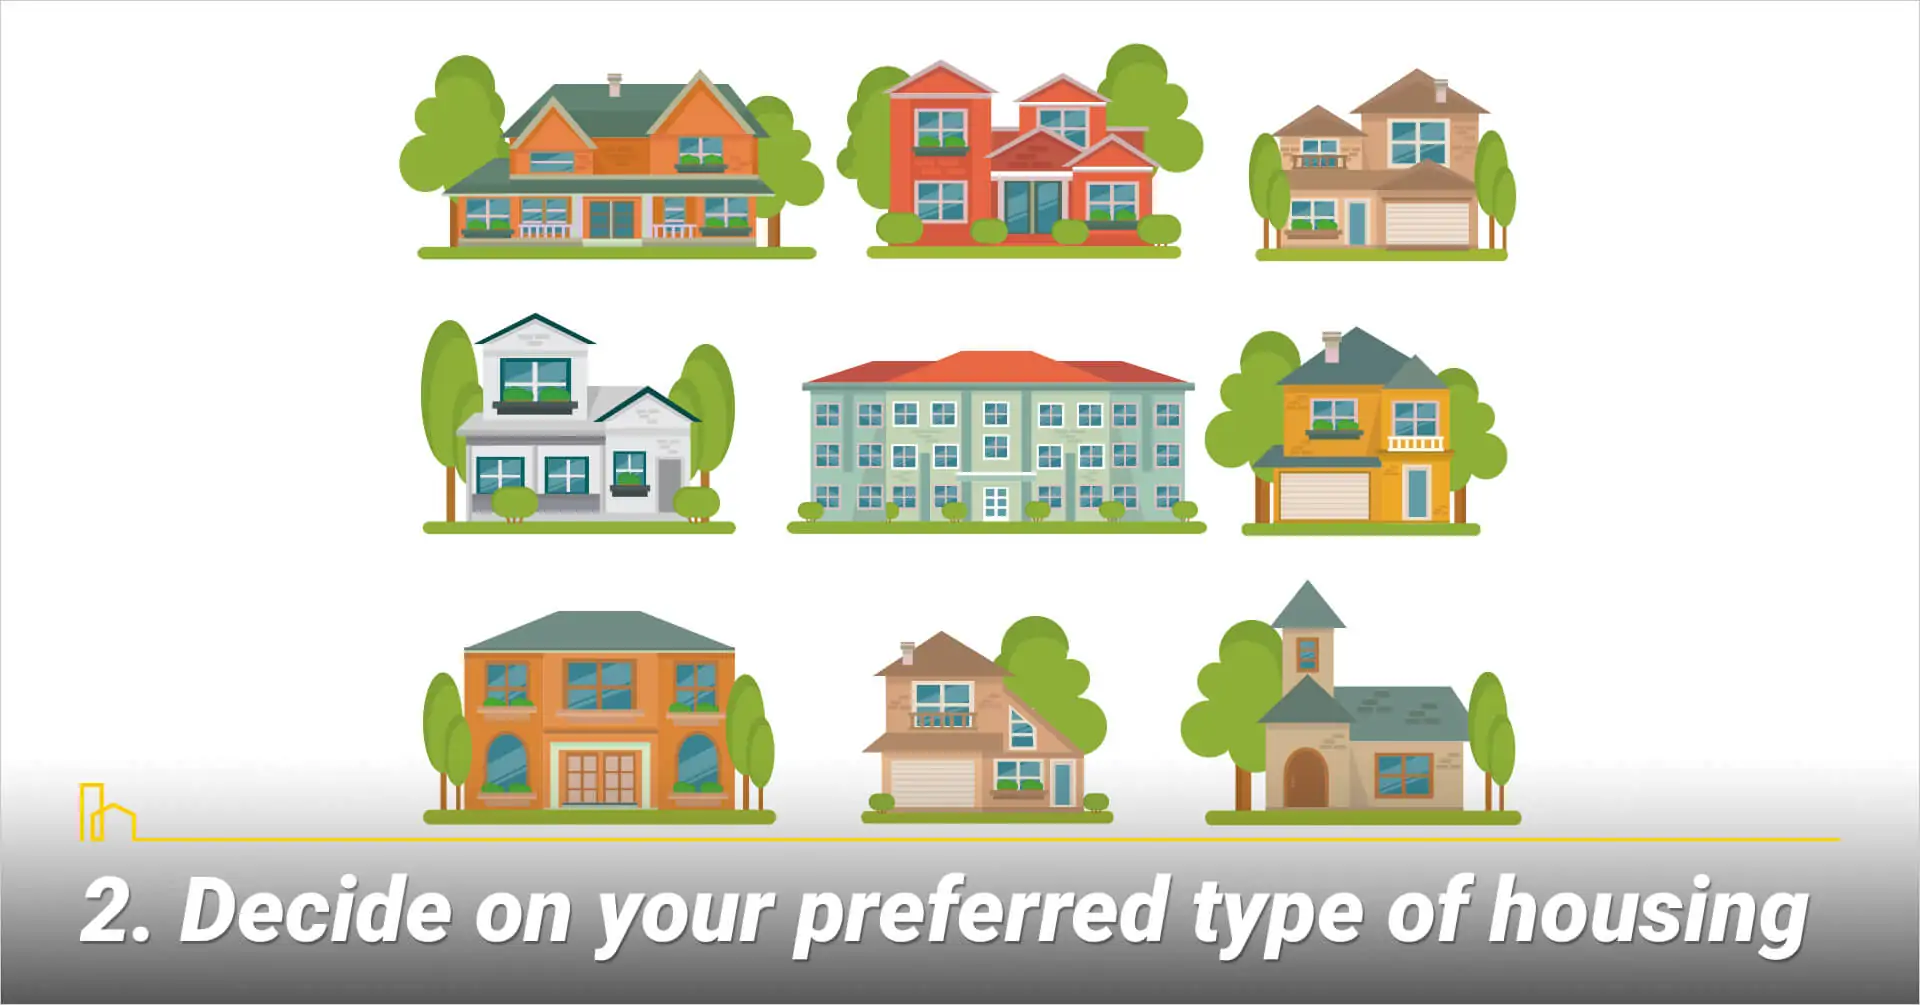 Decide on your preferred type of housing, know your housing type